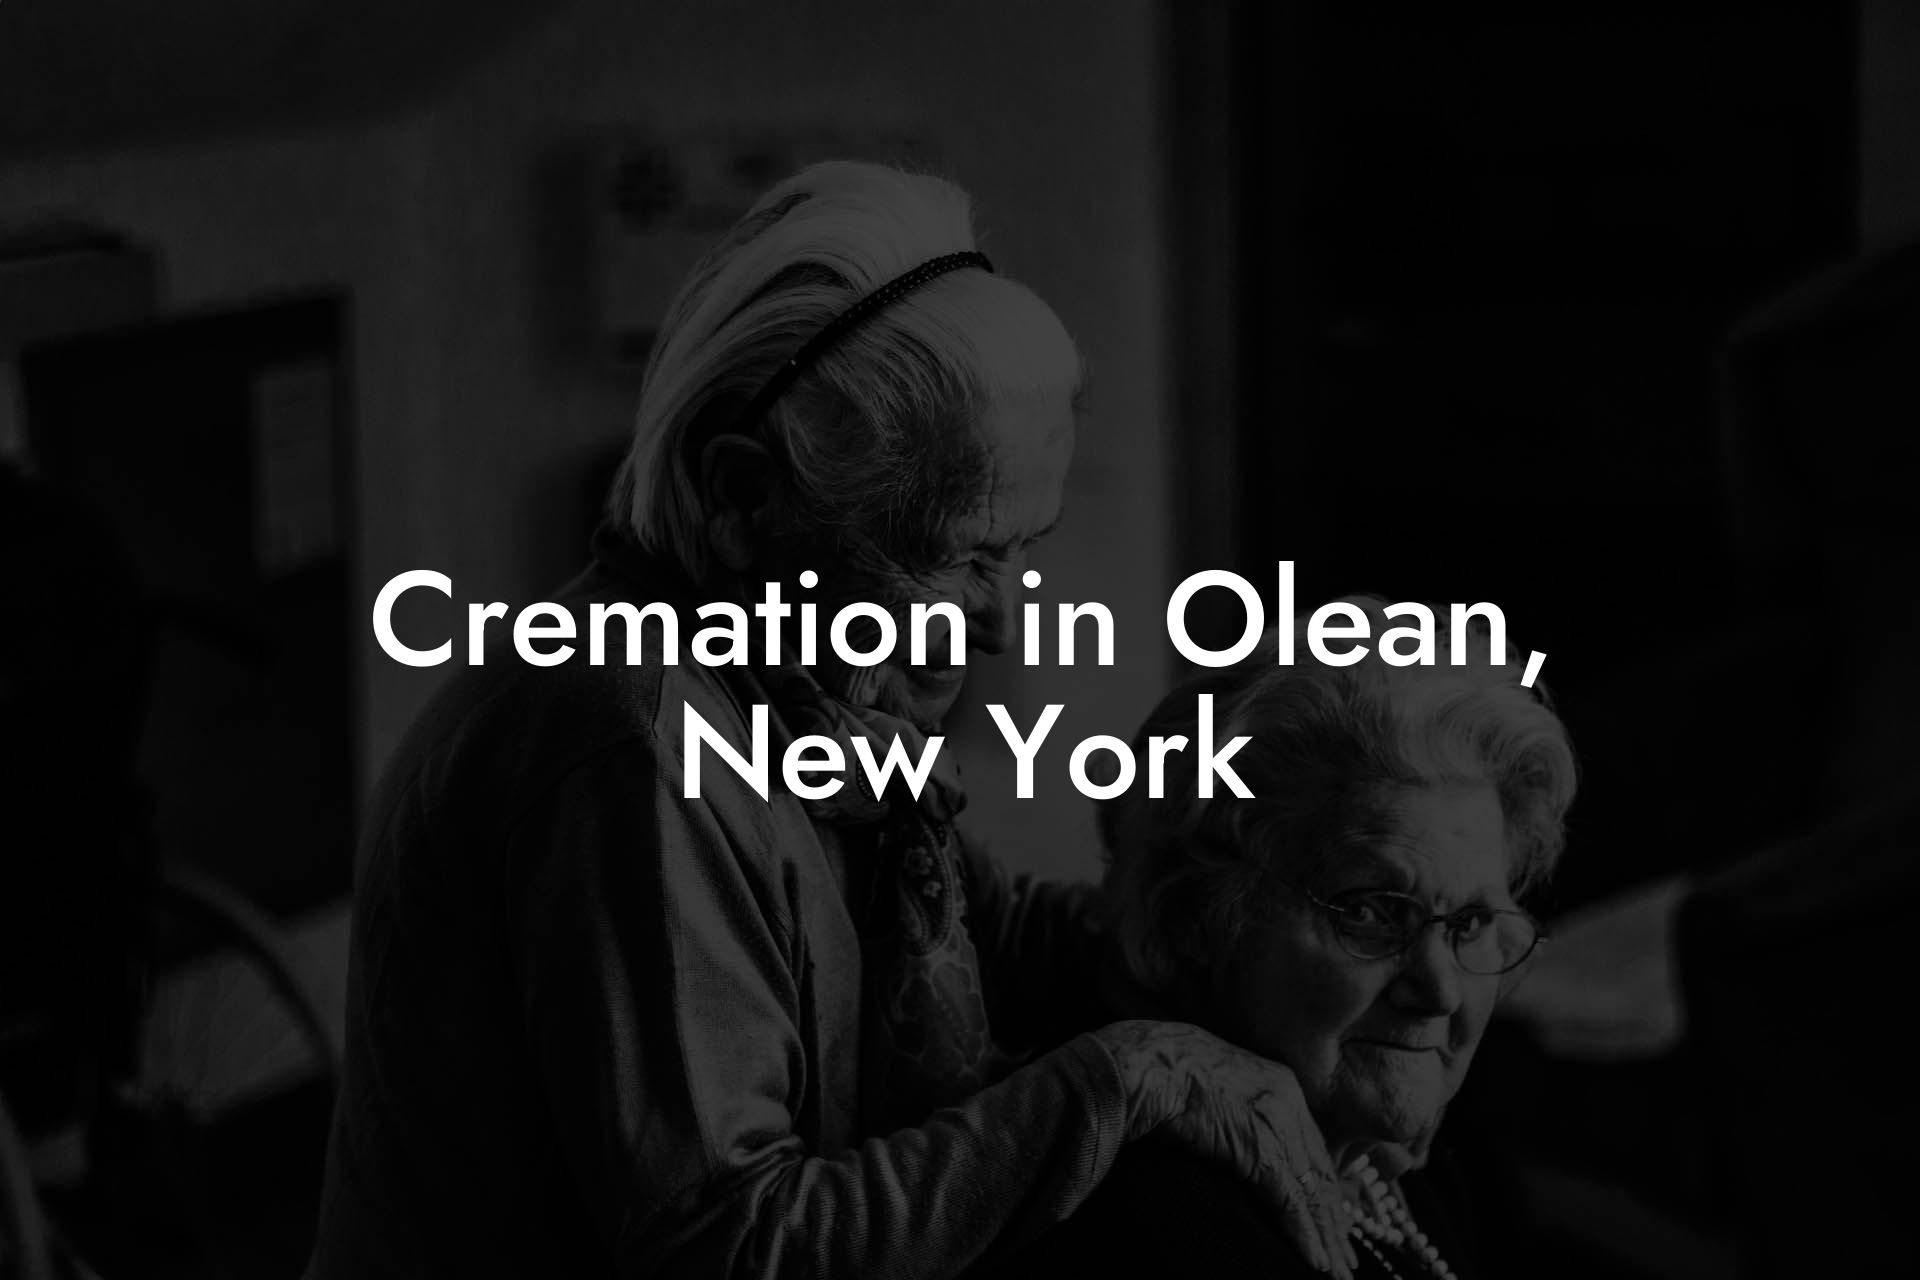 Cremation in Olean, New York